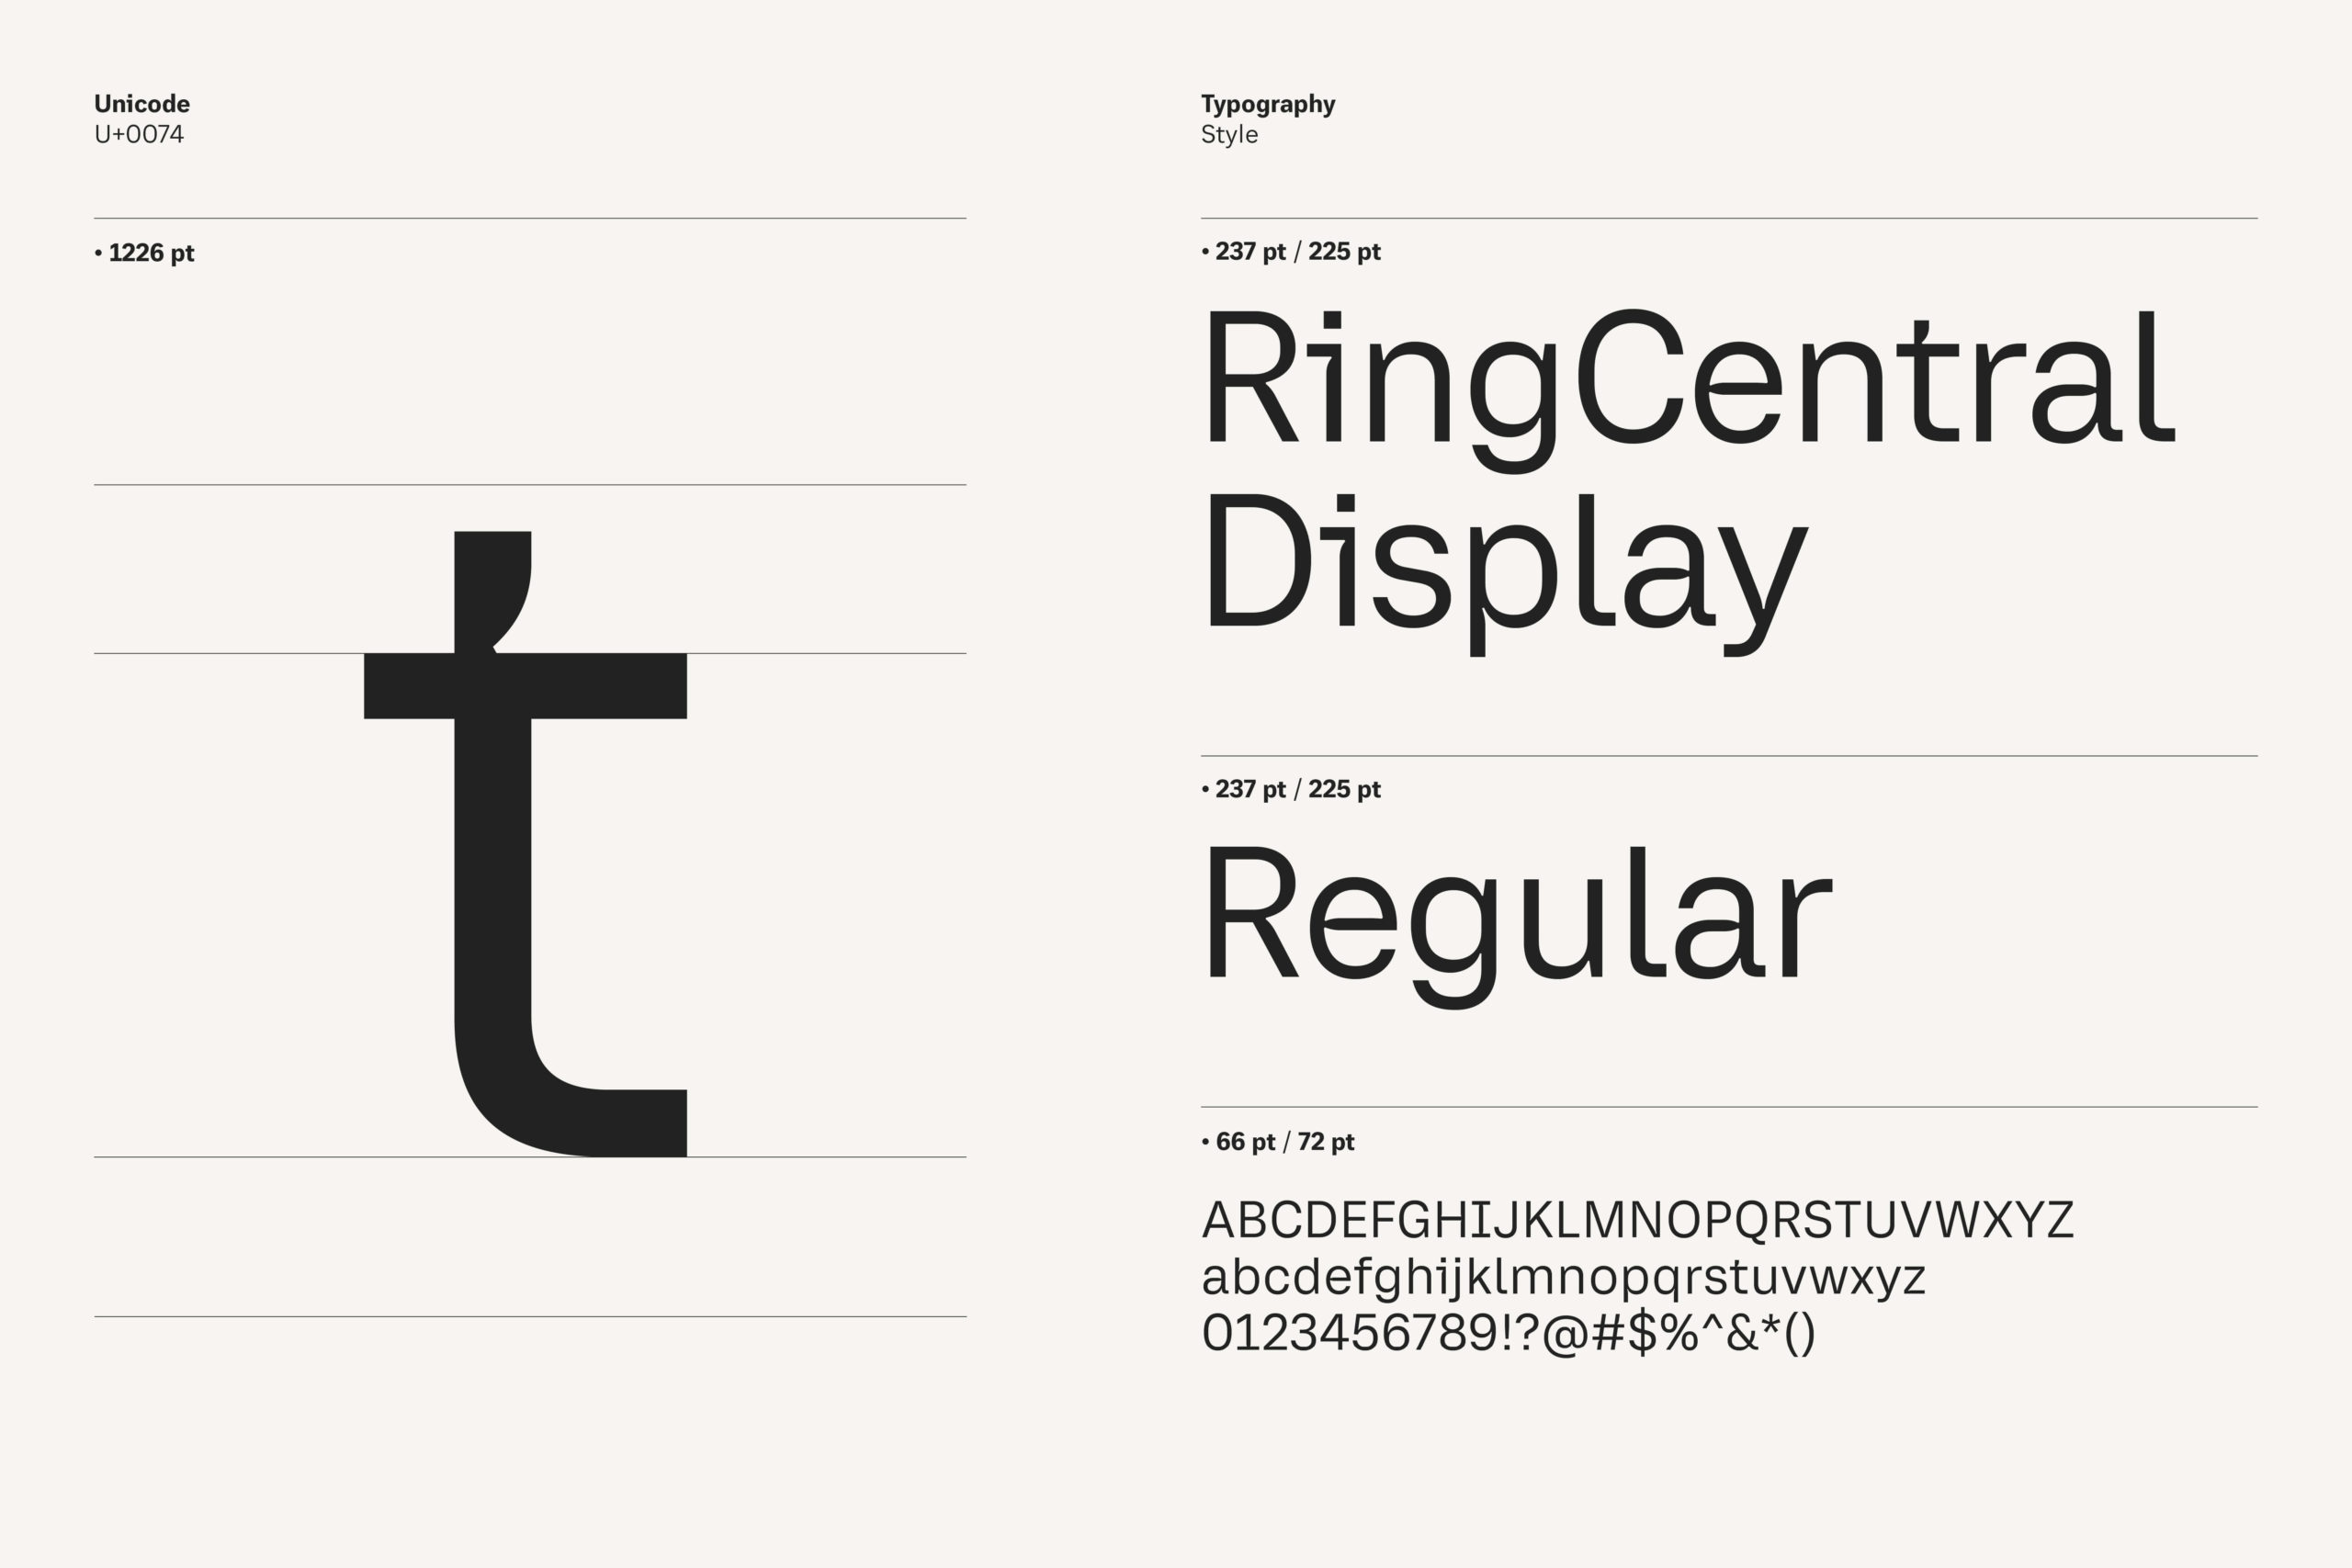 RingCentral Display_Typeface_09142213